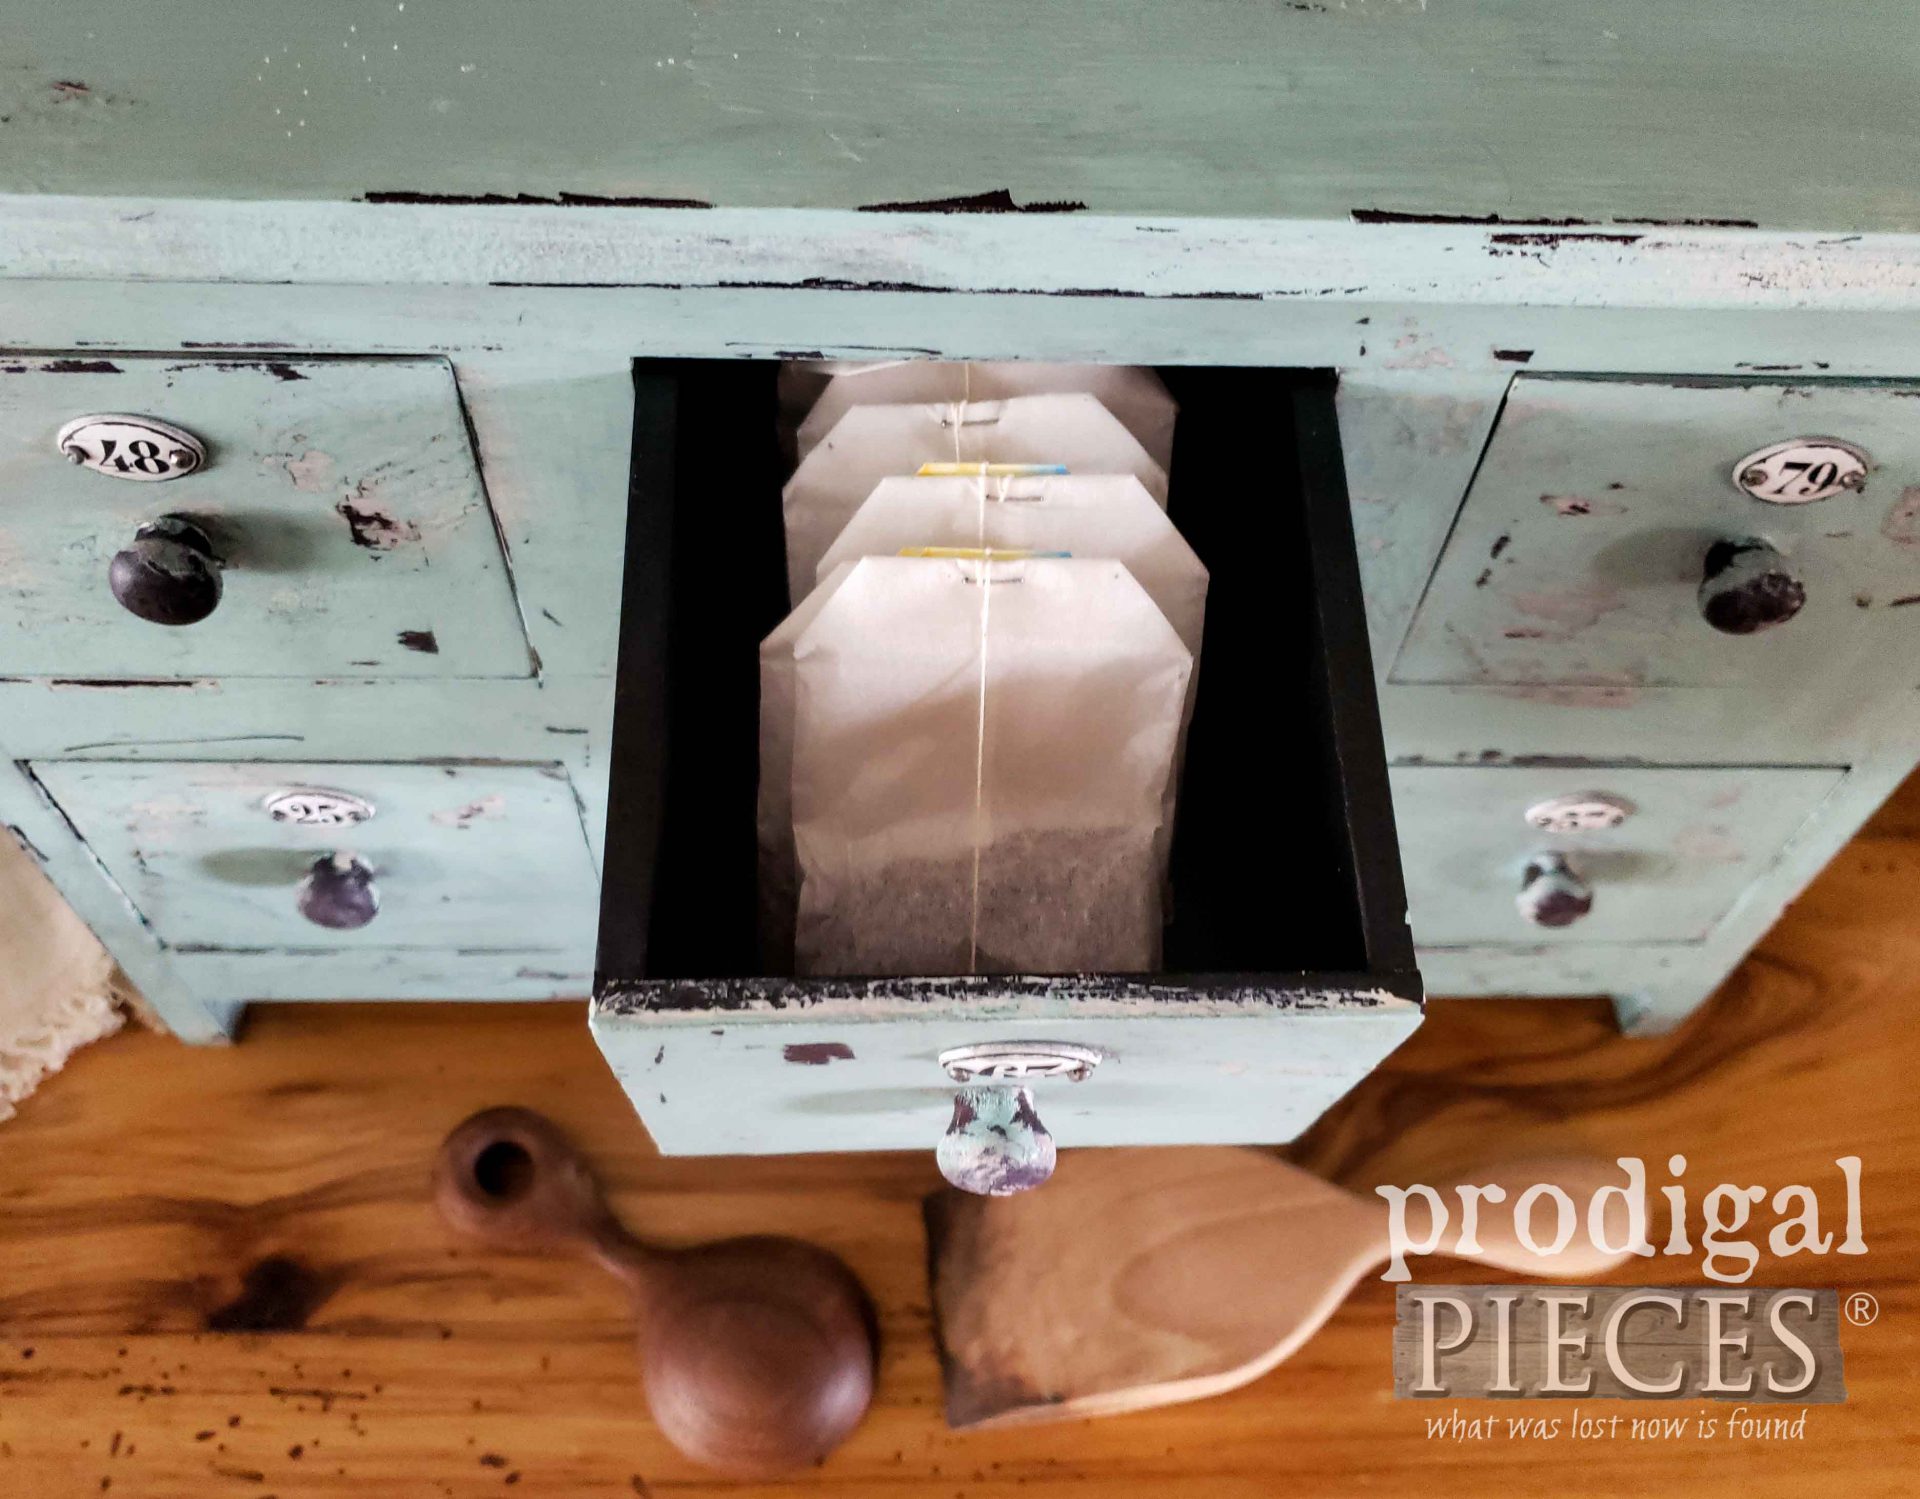 Tea Bag Apothecary Cubby Storage for Kitchen | prodigalpieces.com #prodigalpieces #kitchen #storage #diy #home #homedecor